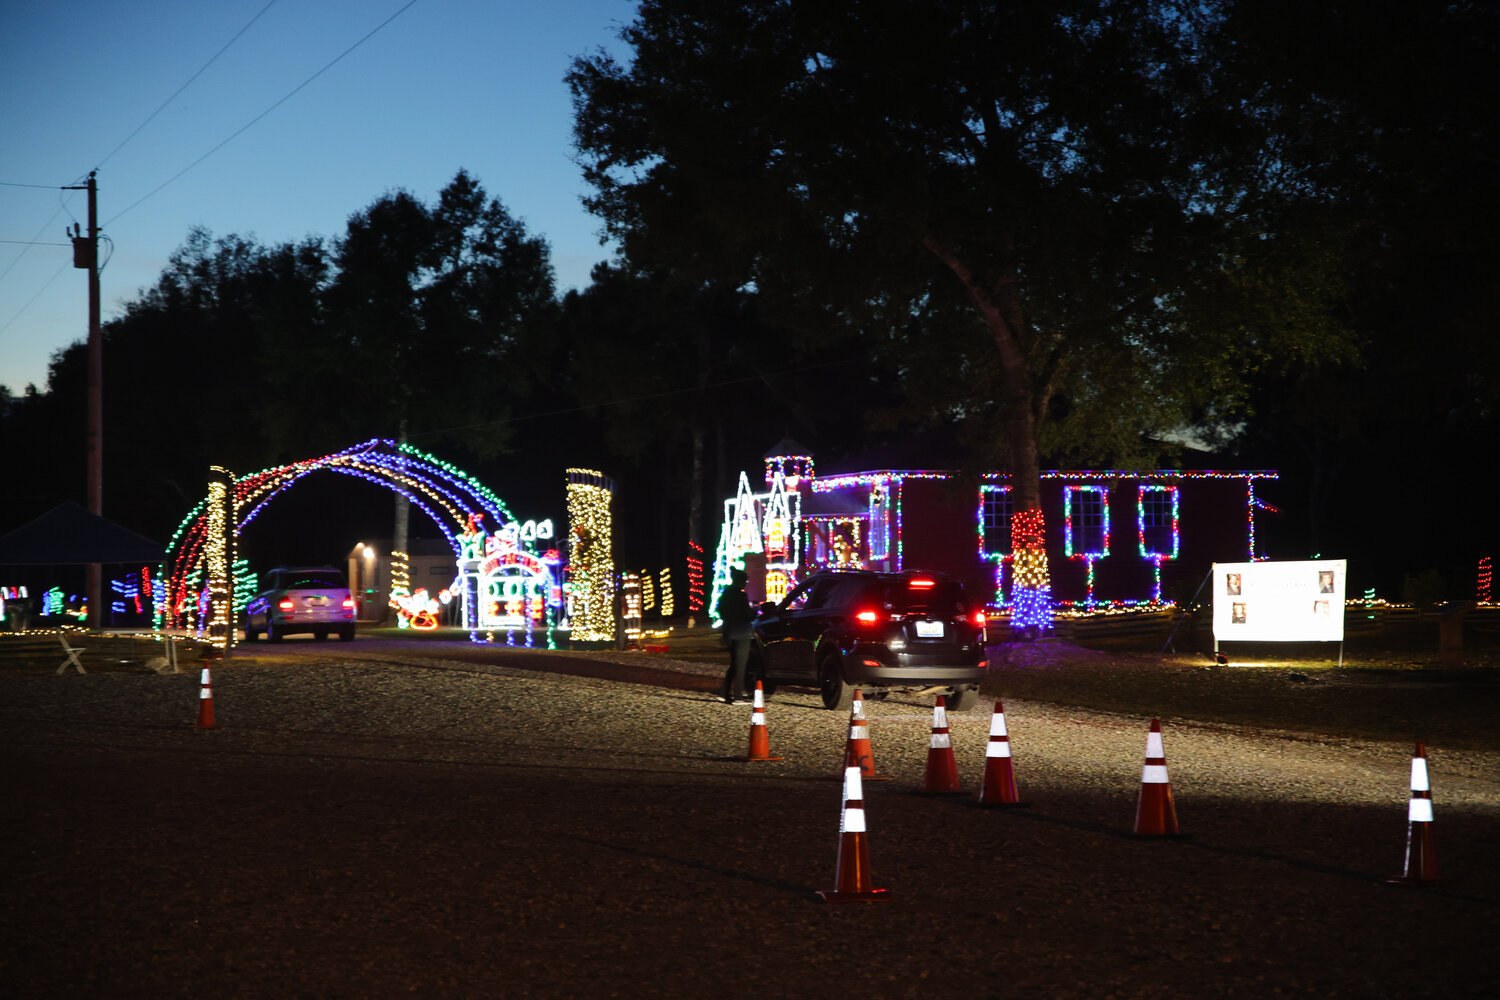 From Nov. 27 through Dec. 30 from 5 until 9 p.m., Bicentennial Park will feature Christmas lights that sync up to music. Passenger vehicles can ride through the roads and watch as the lights sync up with the music that is played on 87.9 FM.